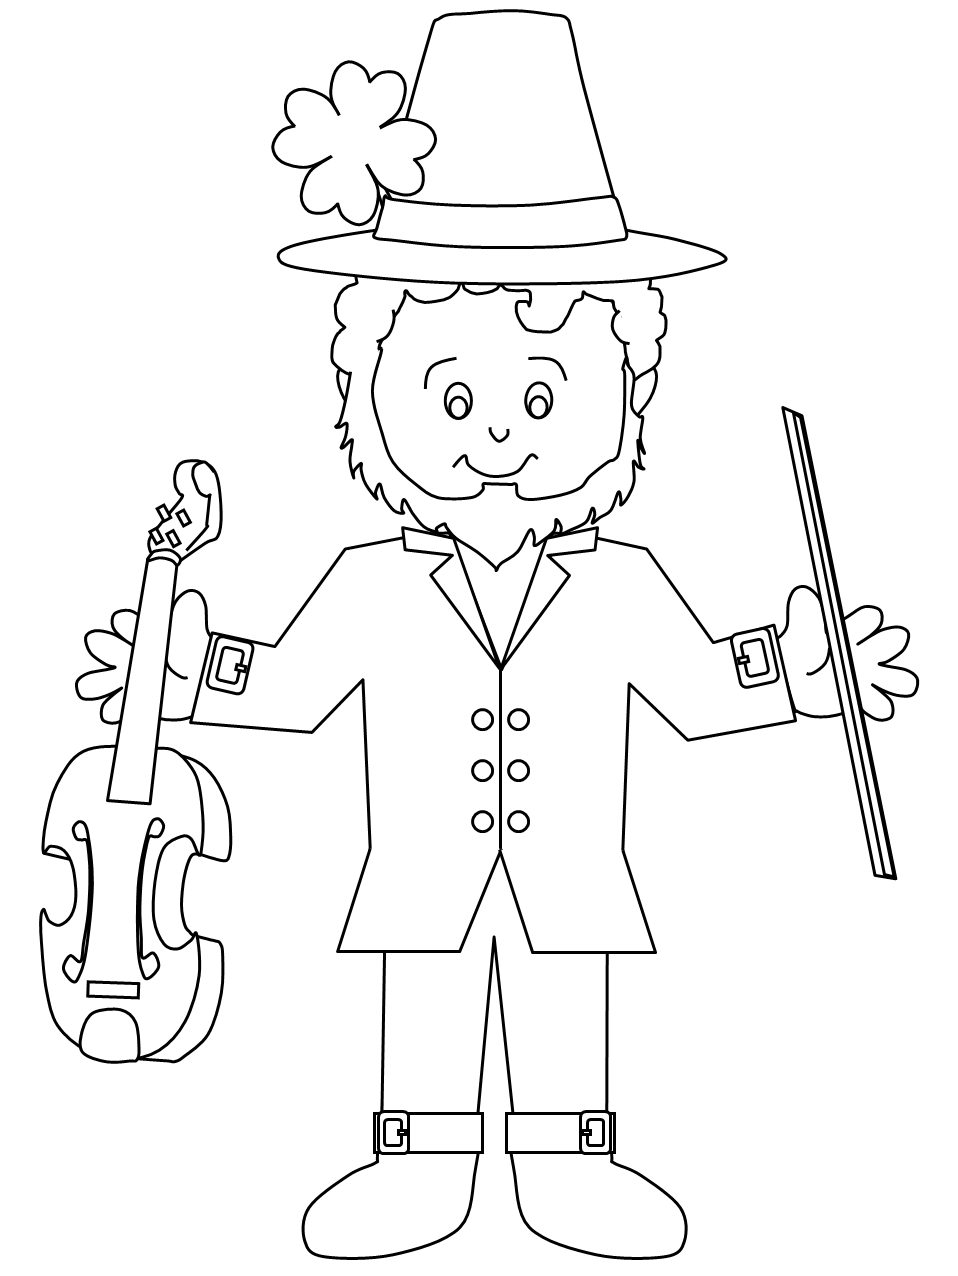 St Patricks Day Coloring Pages Holiday leprechaun5 Printable 2021 0871 Coloring4free